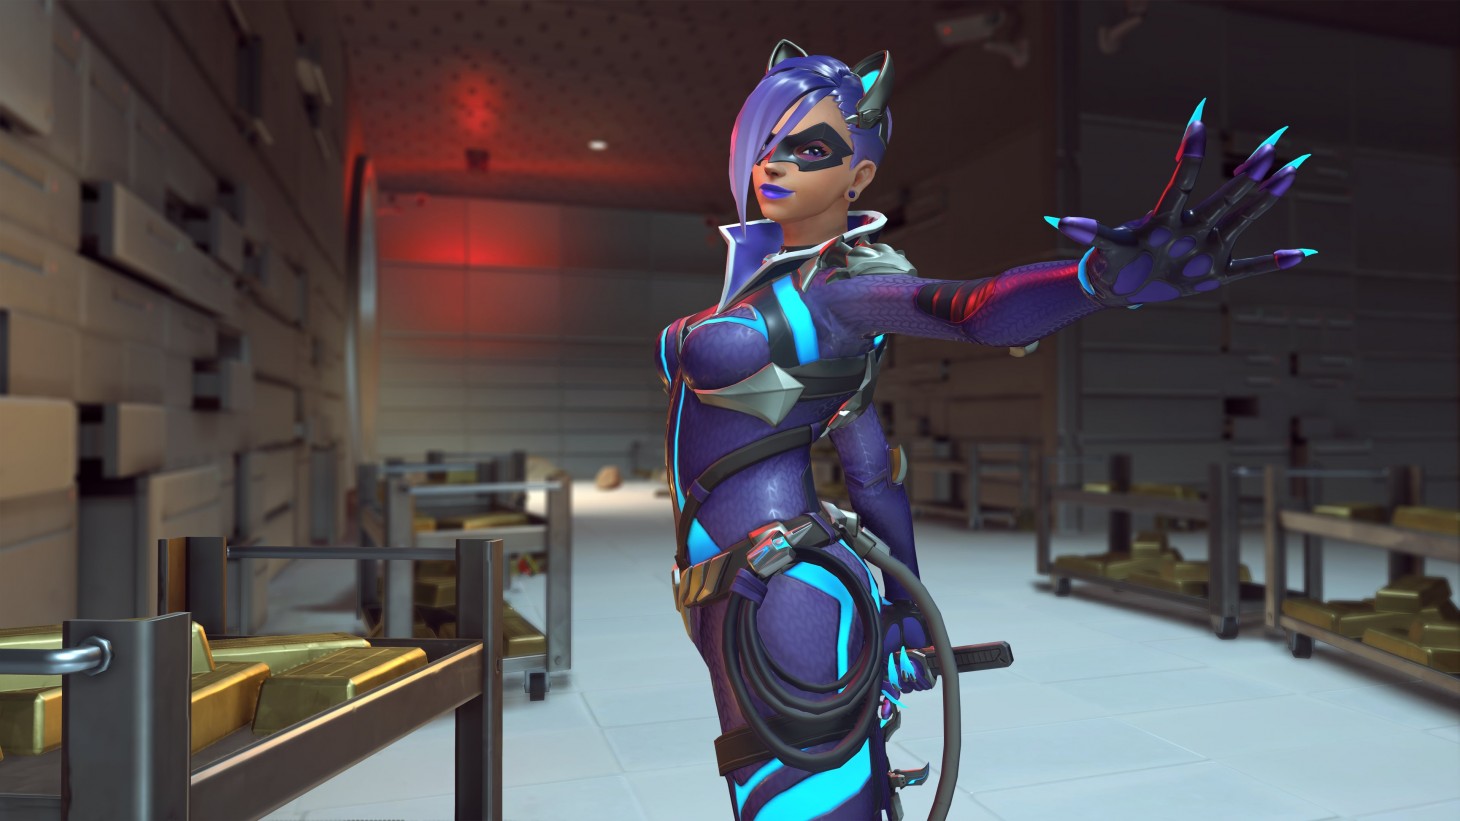 Overwatch Anniversary Event Brings Back FanFavorite Events, New Skins